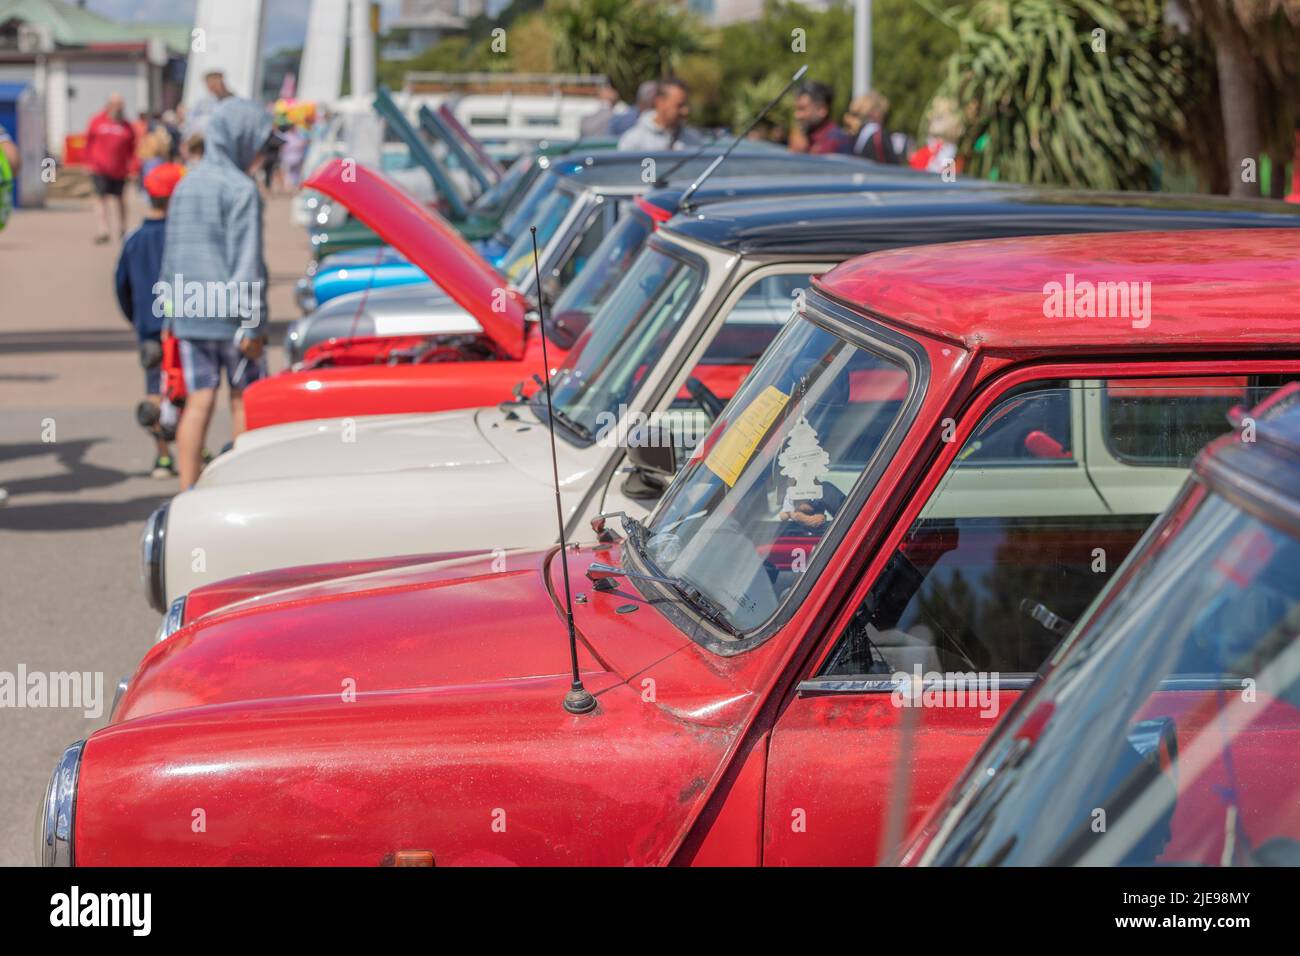 Southend on sea, UK. 26th June, 2022. Classic and vintage cars on display at the City Beach promenade in Southend. The cars and drivers have taken part in the 27th annual London to Southend classic vehicle run. Penelope Barritt/Alamy Live News Stock Photo